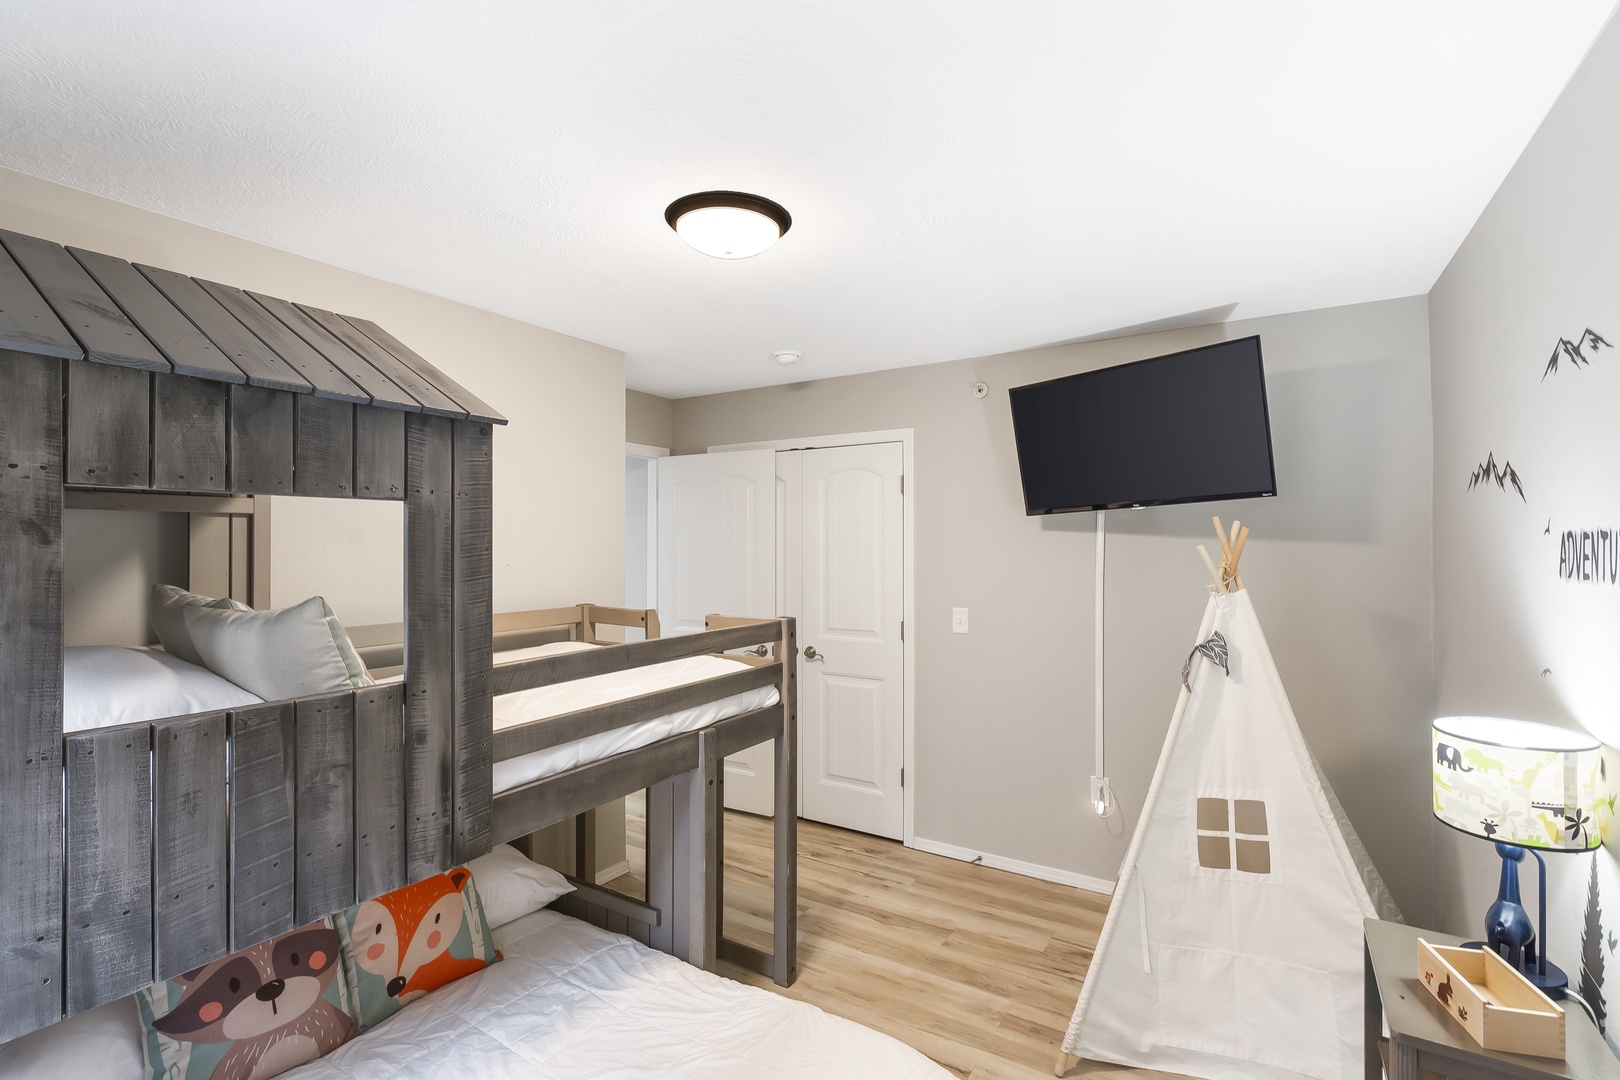 Kids will adore this camp-style bedroom with twin-over-full bunk beds & Smart TV